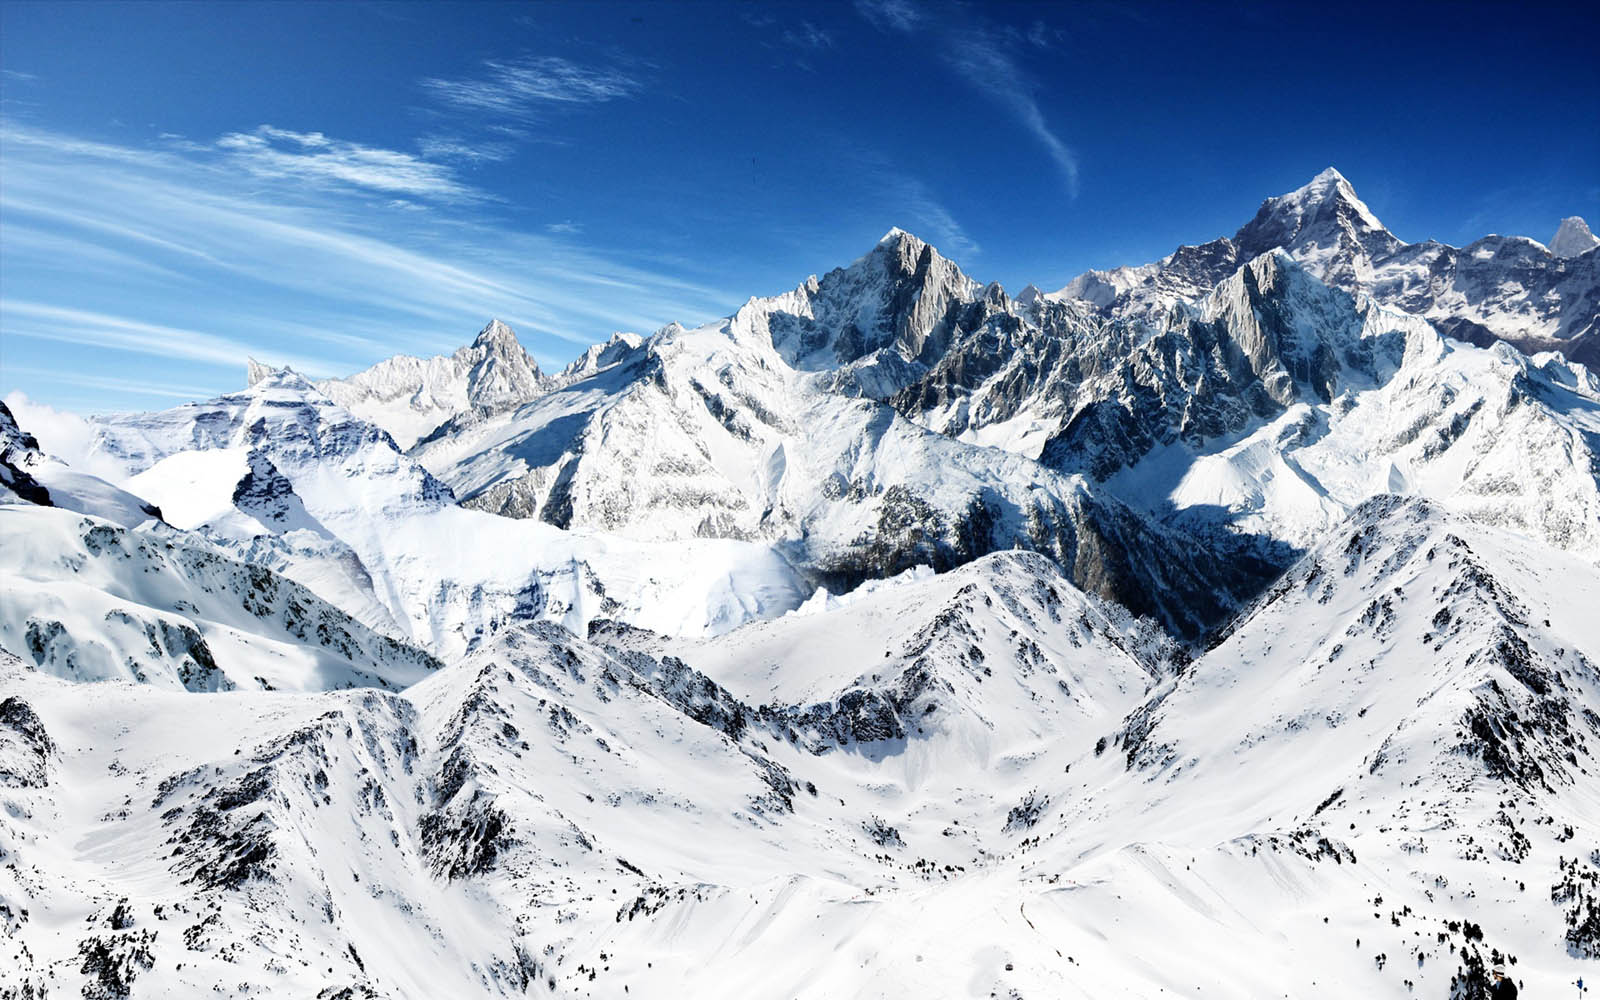  Mountains Wallpapers Backgrounds Photos Imagesand Pictures for free